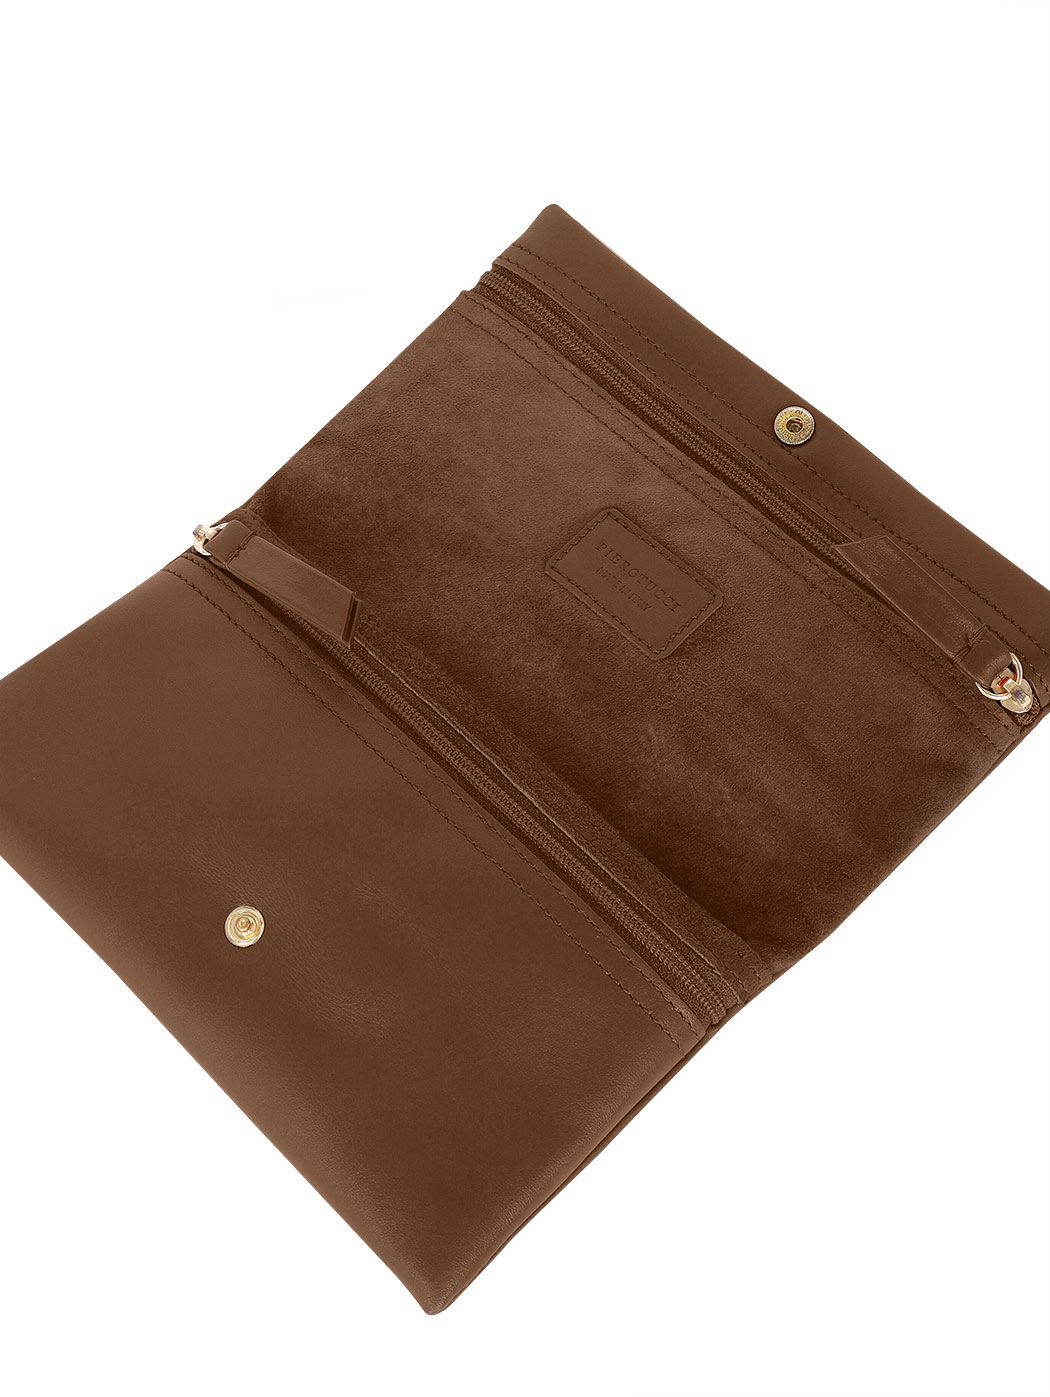 Dark Brown Clutch Bag in Mangalore - Dealers, Manufacturers & Suppliers -  Justdial